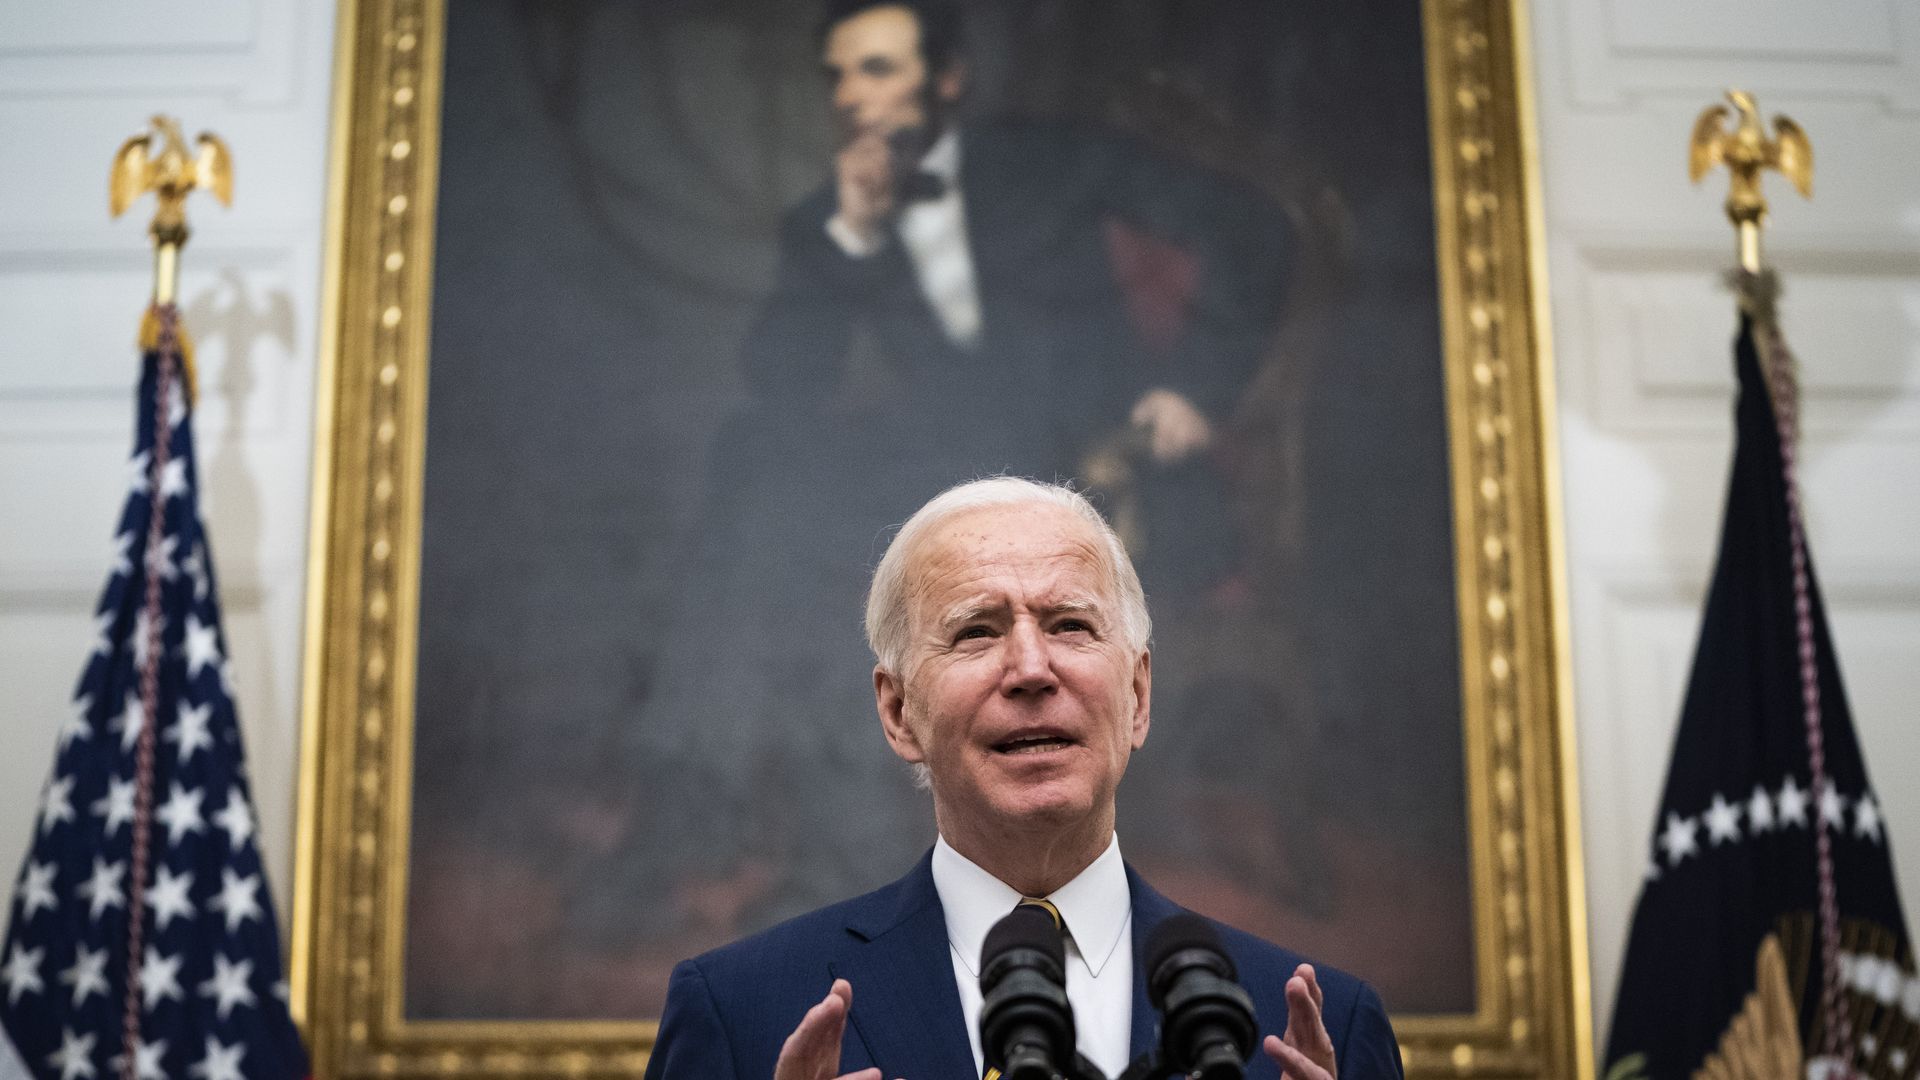 WASHINGTON, DC - JANUARY 22: President Joe R. Biden speaks about the economy before signing executive orders in the State Dining Room at the White House on Friday, Jan 22, 2021 in Washington, DC.